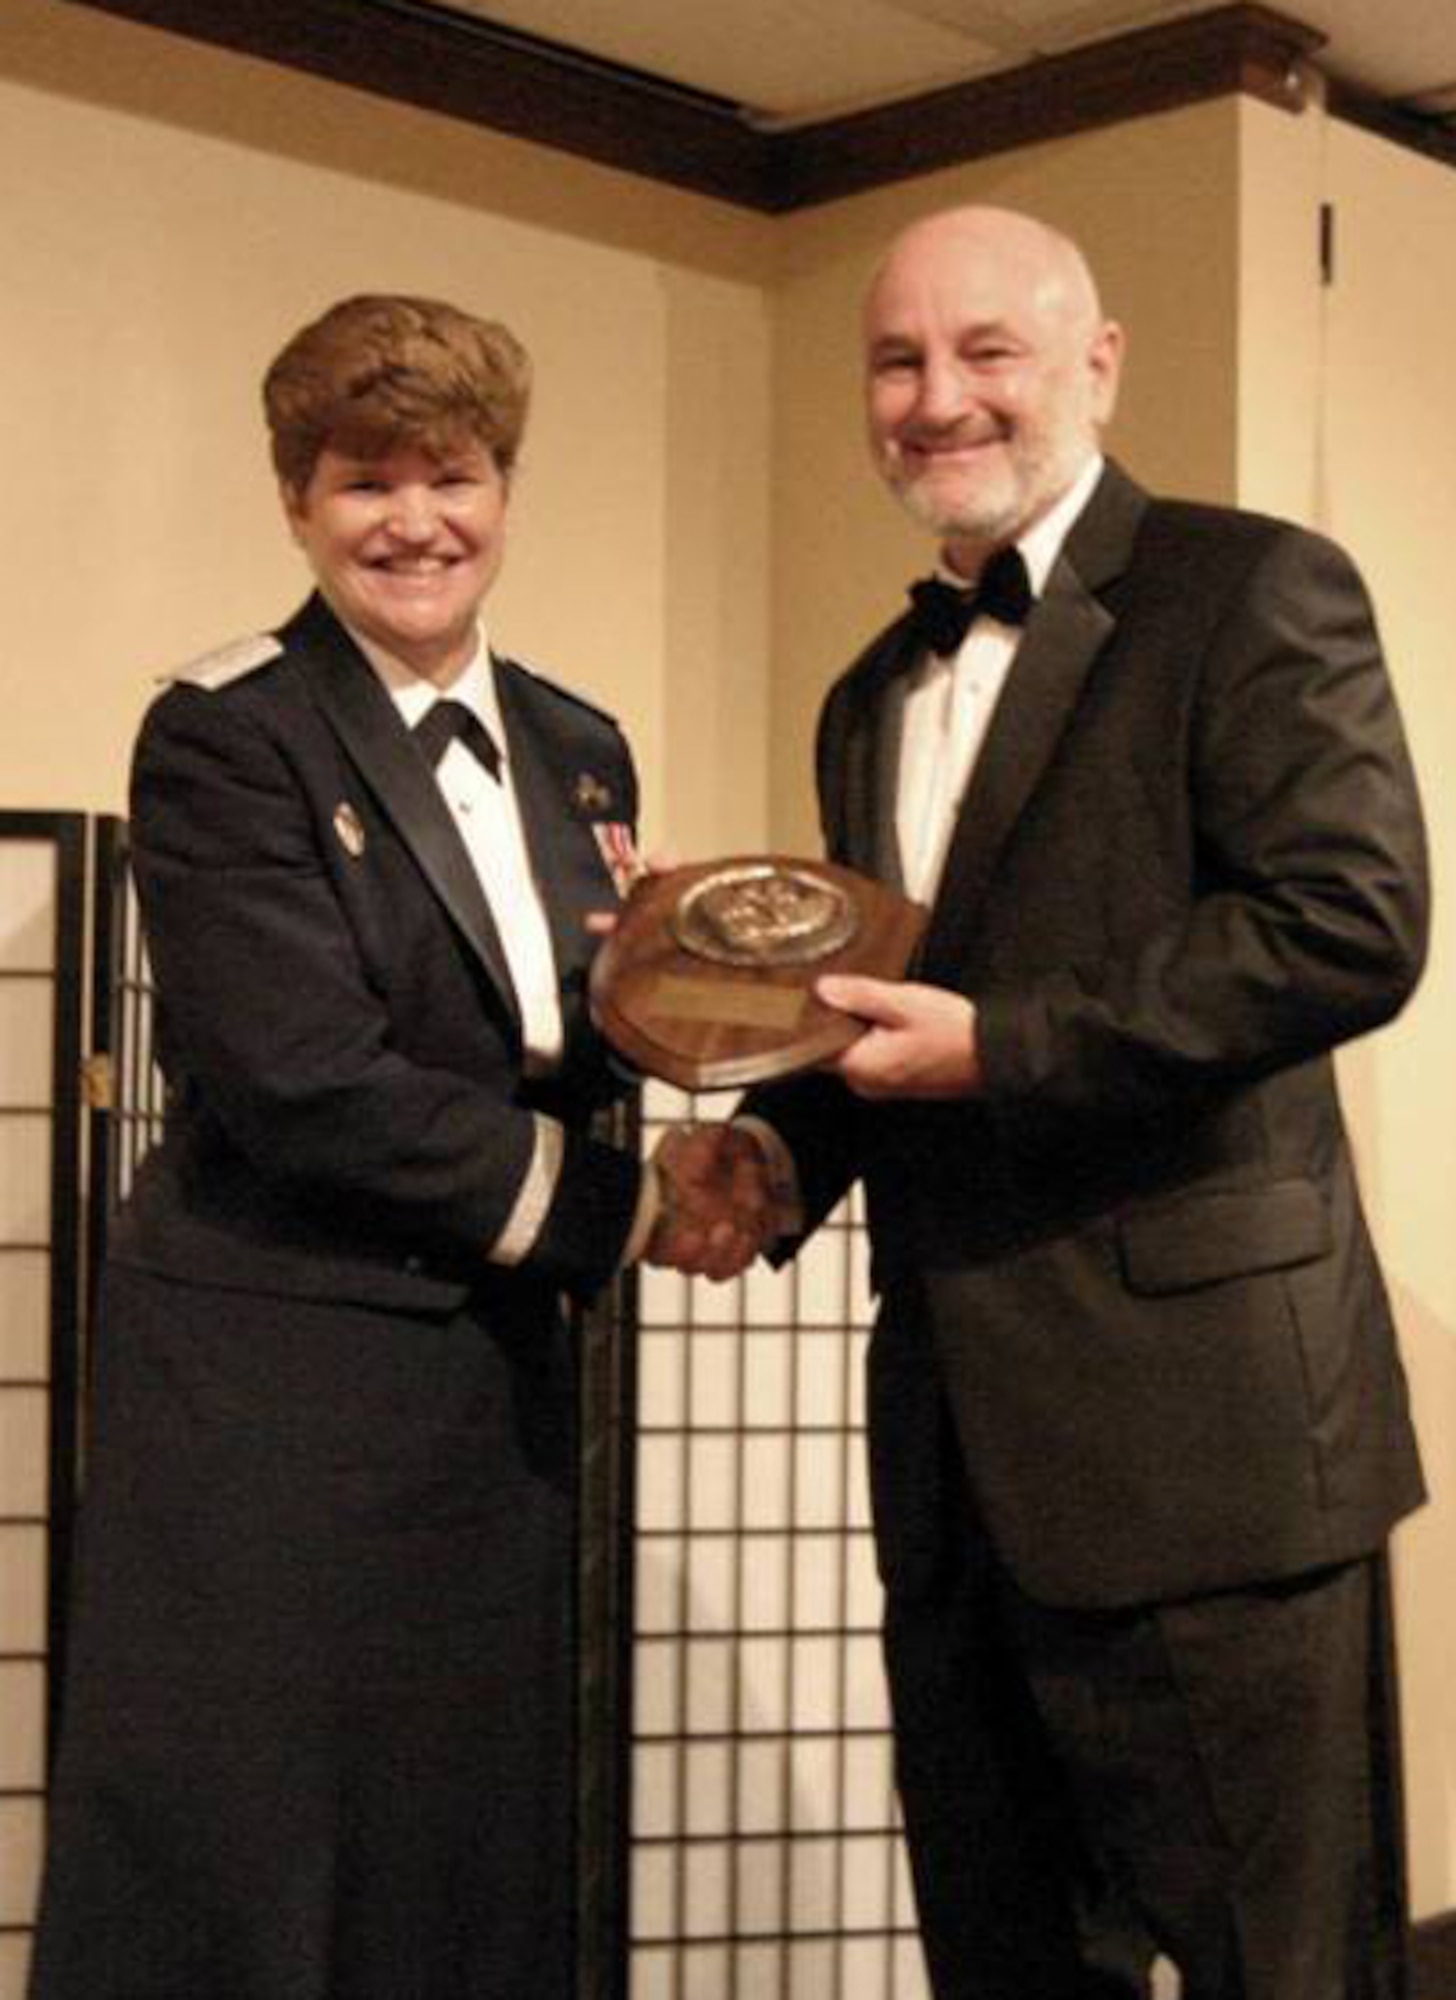 Dave Madden, MILSATCOM director receives a plaque from Gen. Janet Wolfenbarger, Air Force Material Command commander, upon his induction into the Space Operations Hall of Fame, Nov. 3. (Photo provided by the San Jose Chapter of the AFA)